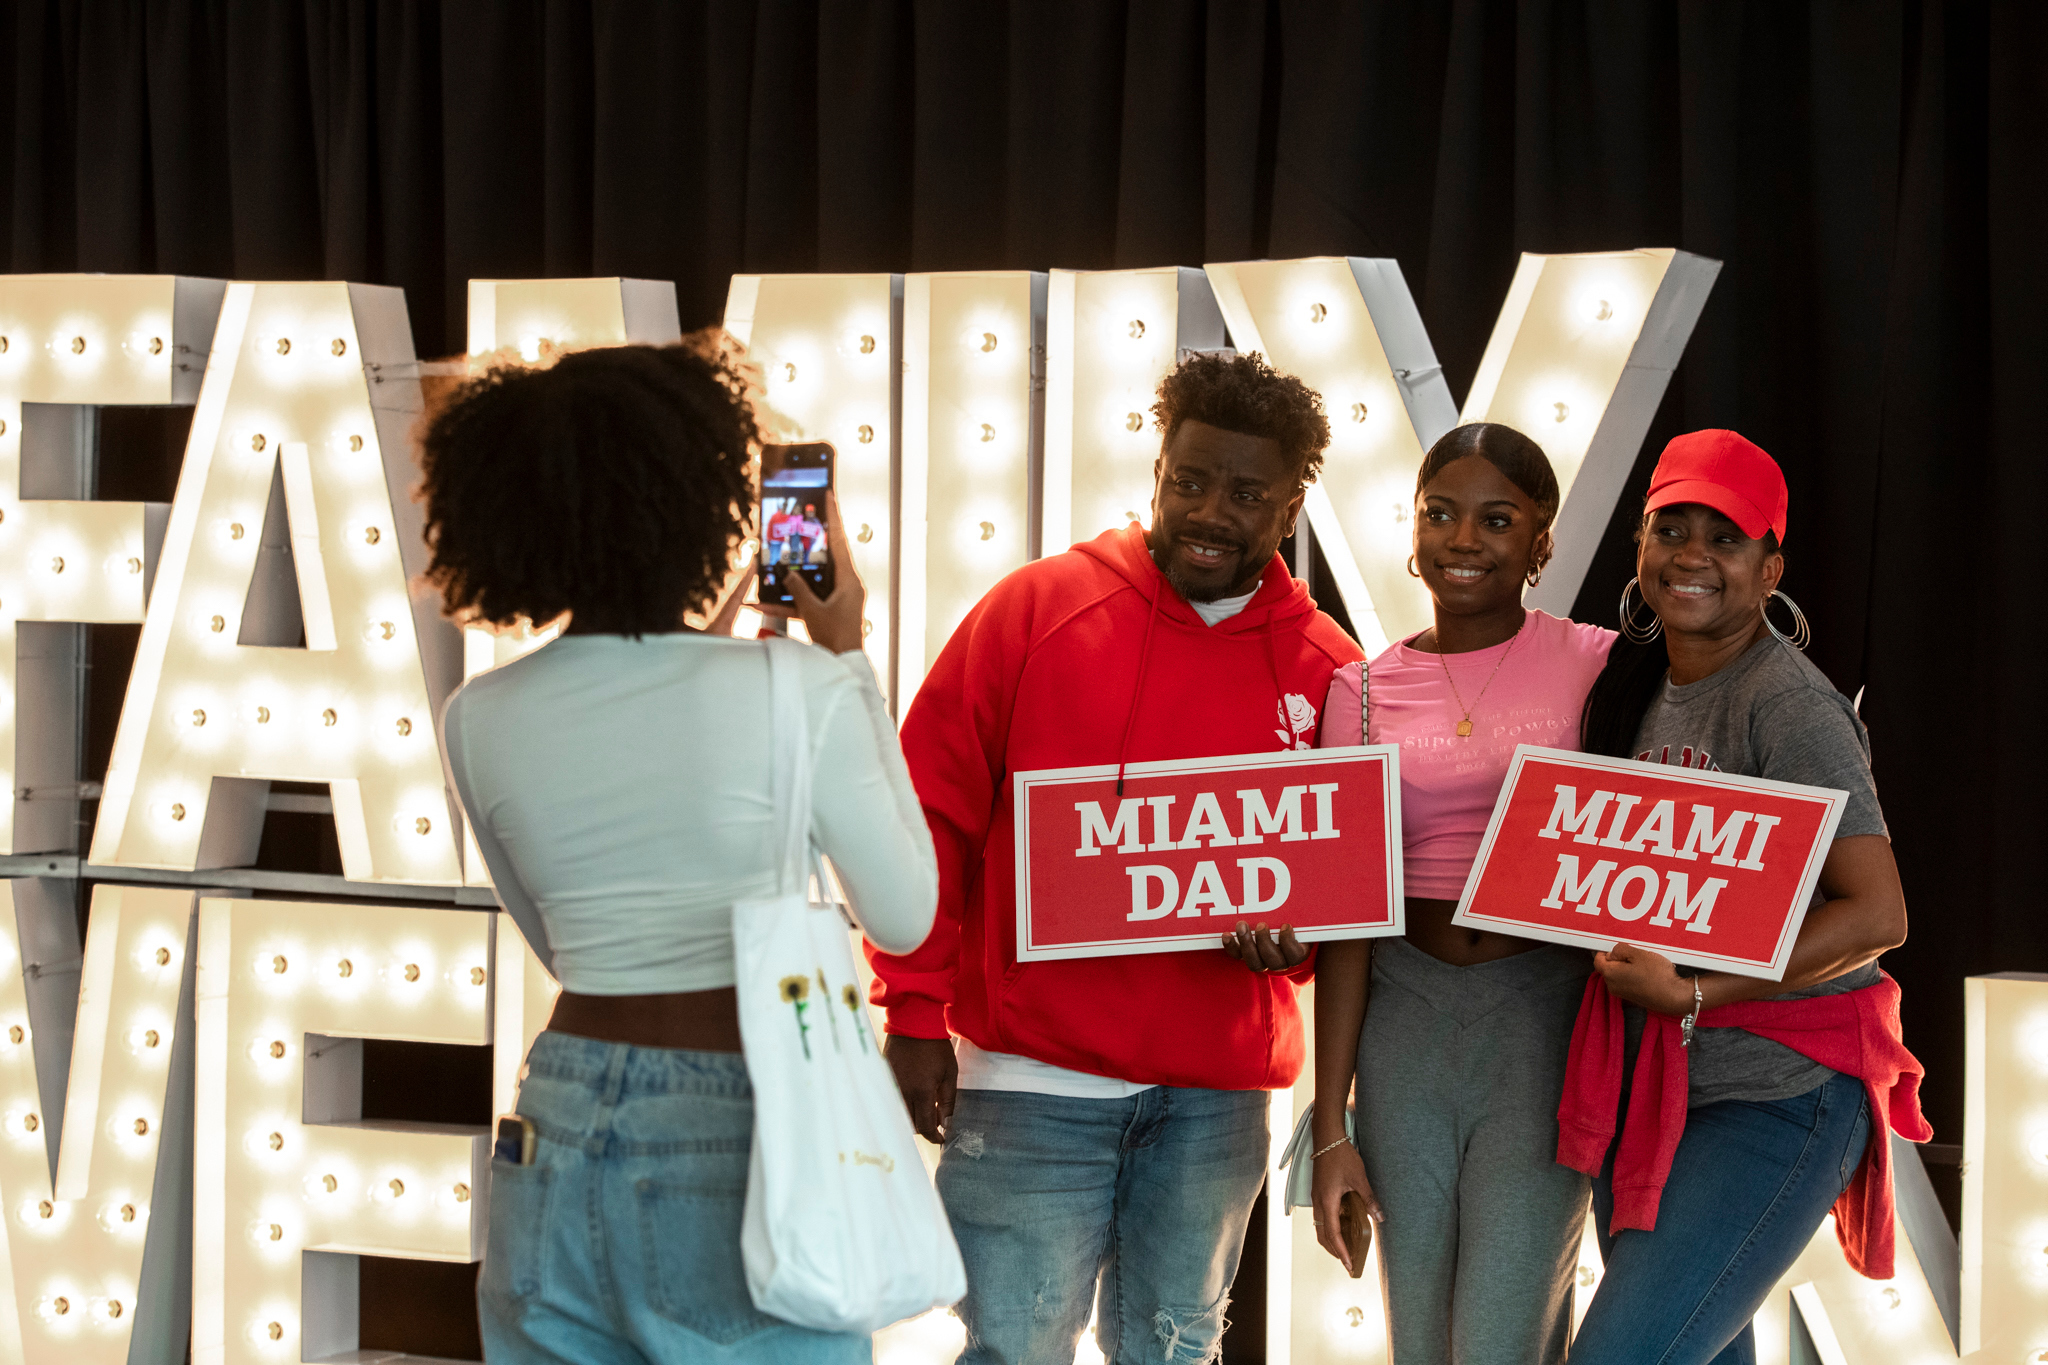 A student and parents pose in front of a "Family Weekend" sign. The parents hold "Miami Mom" and "Miami Dad" signs.